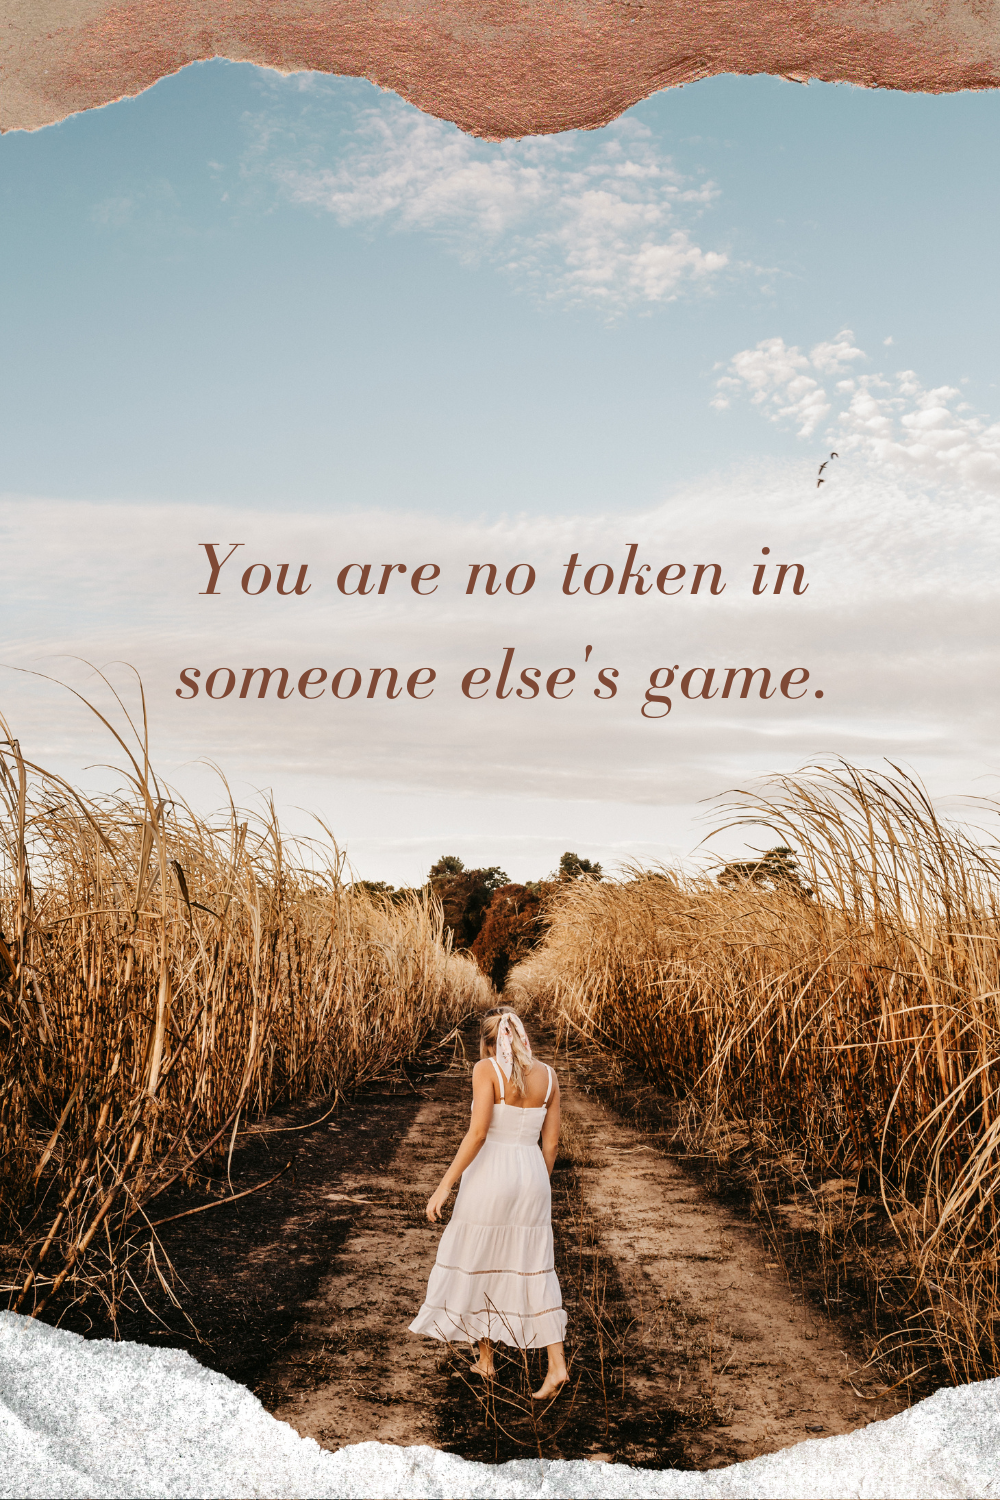 You are no token in someone else's game.